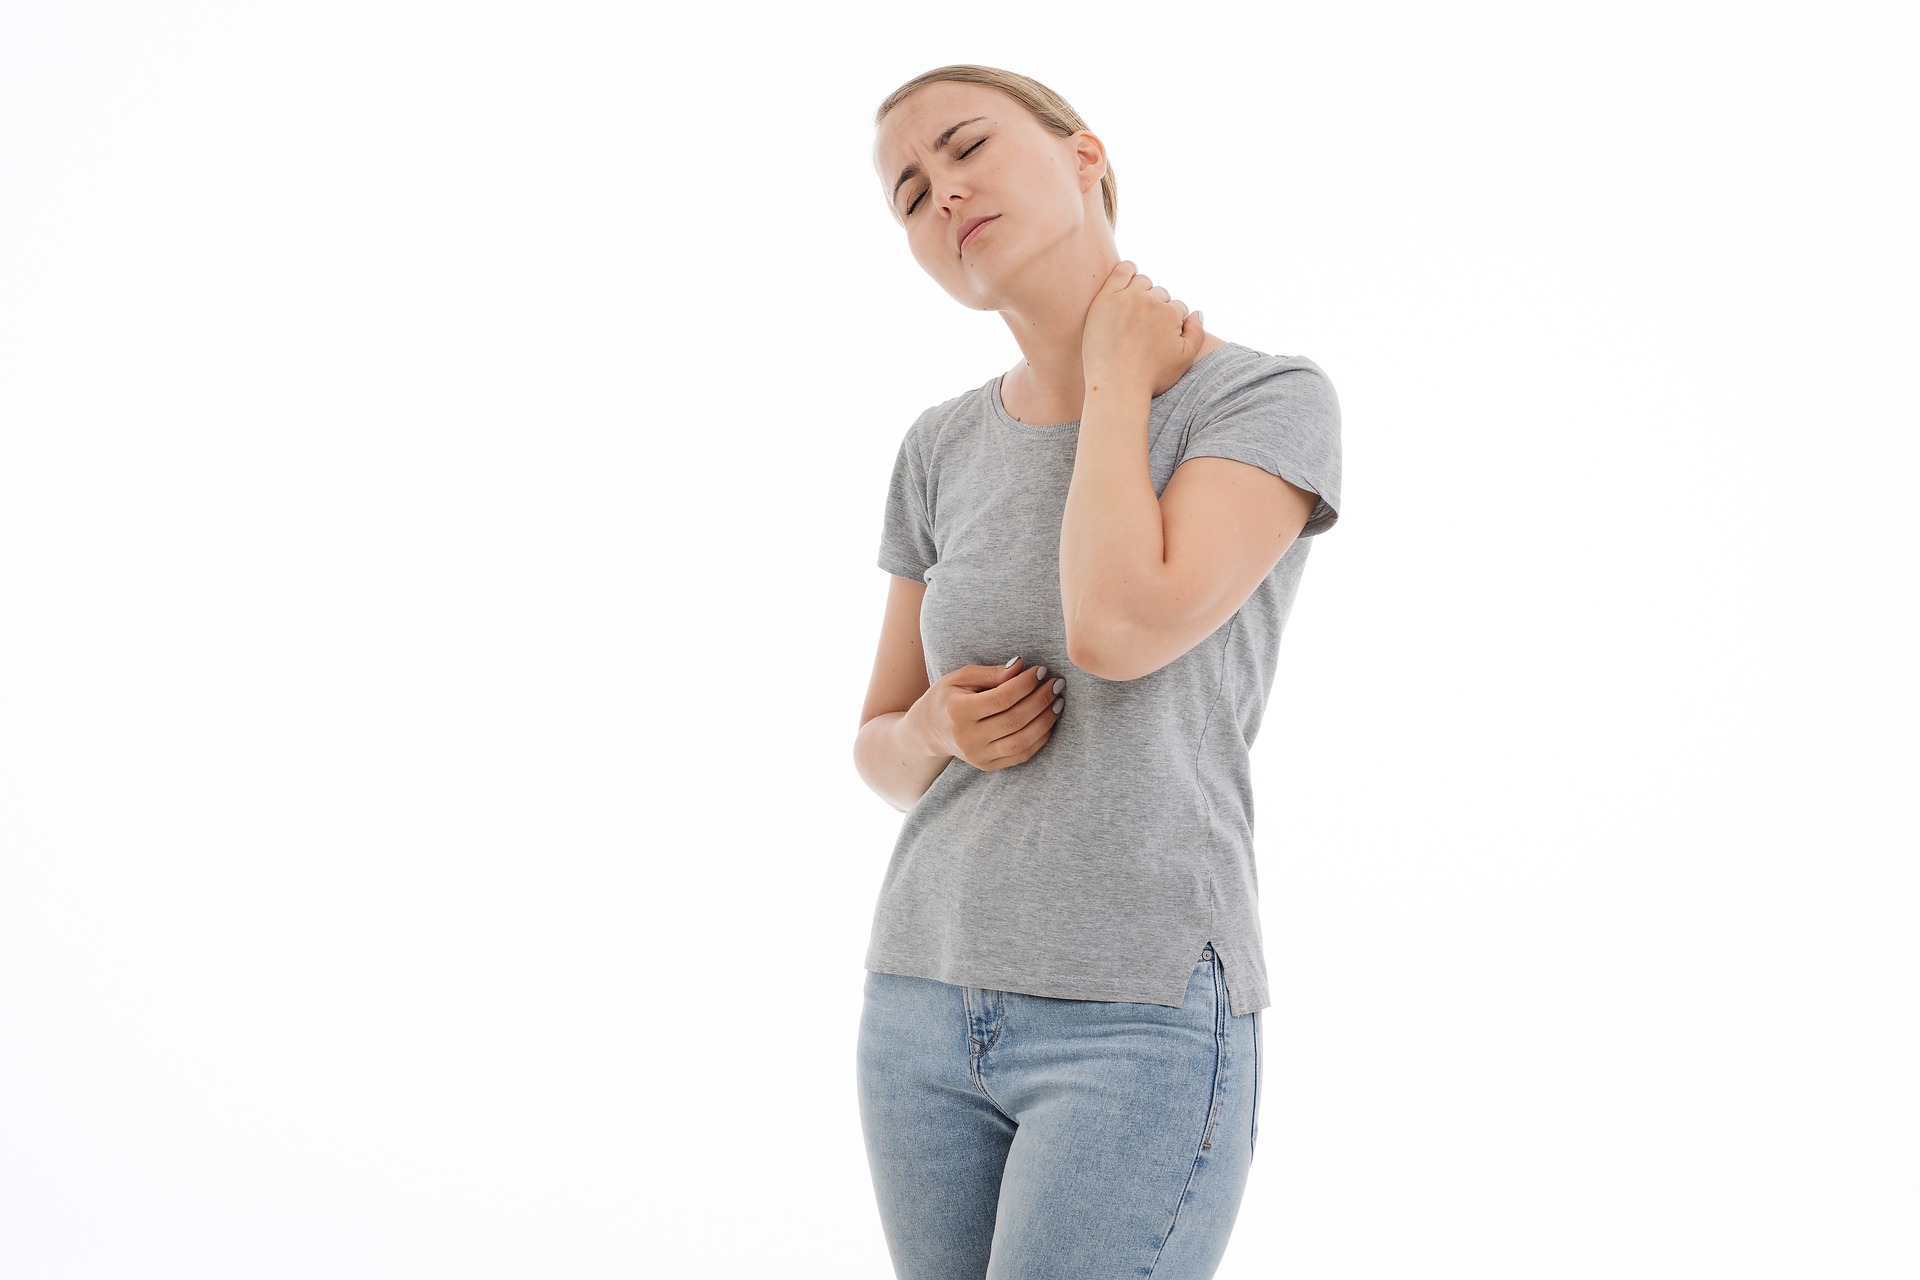 can bad posture cause neck pain